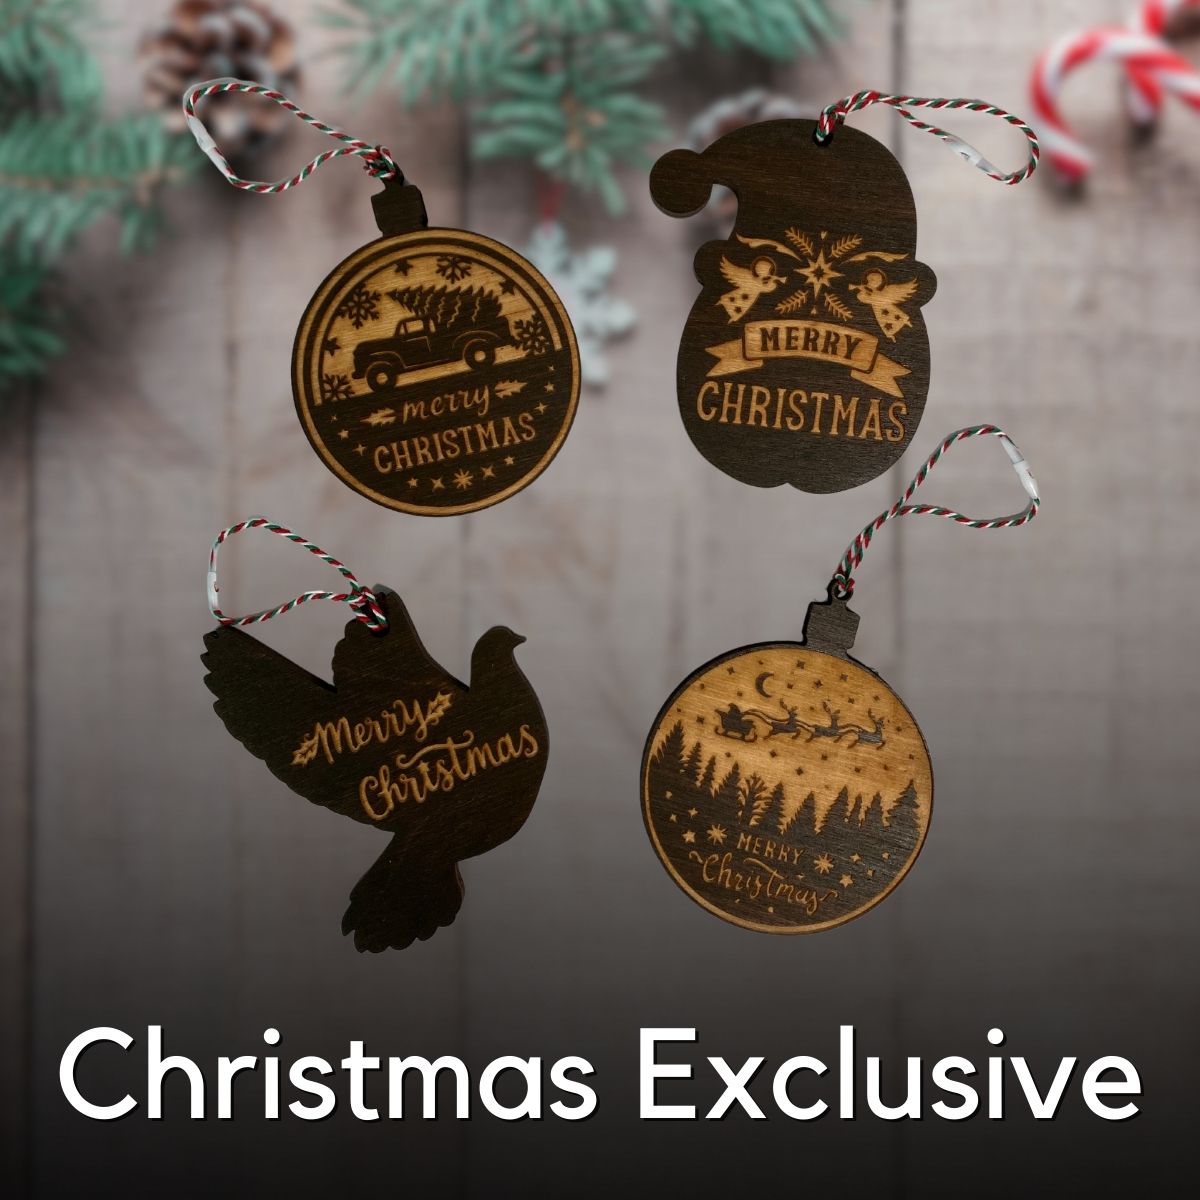 Christmas Exclusives